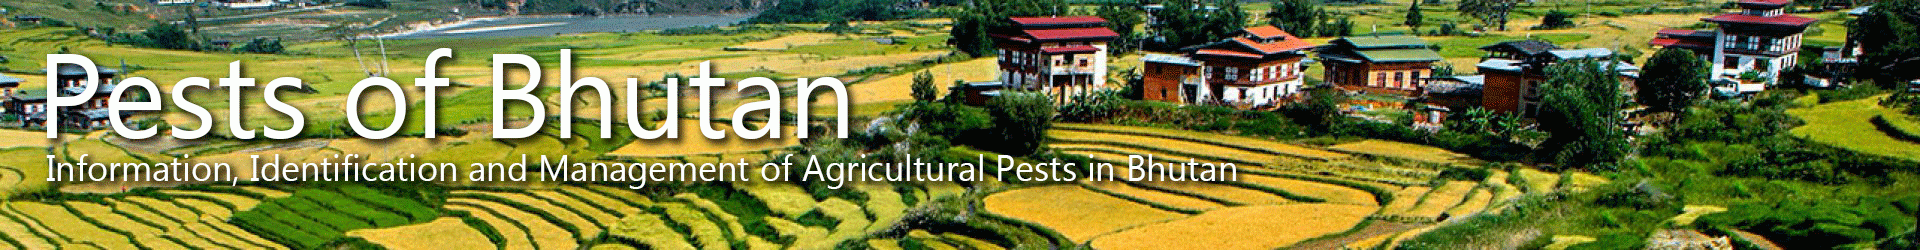 Launch of the Pests of Bhutan website and database